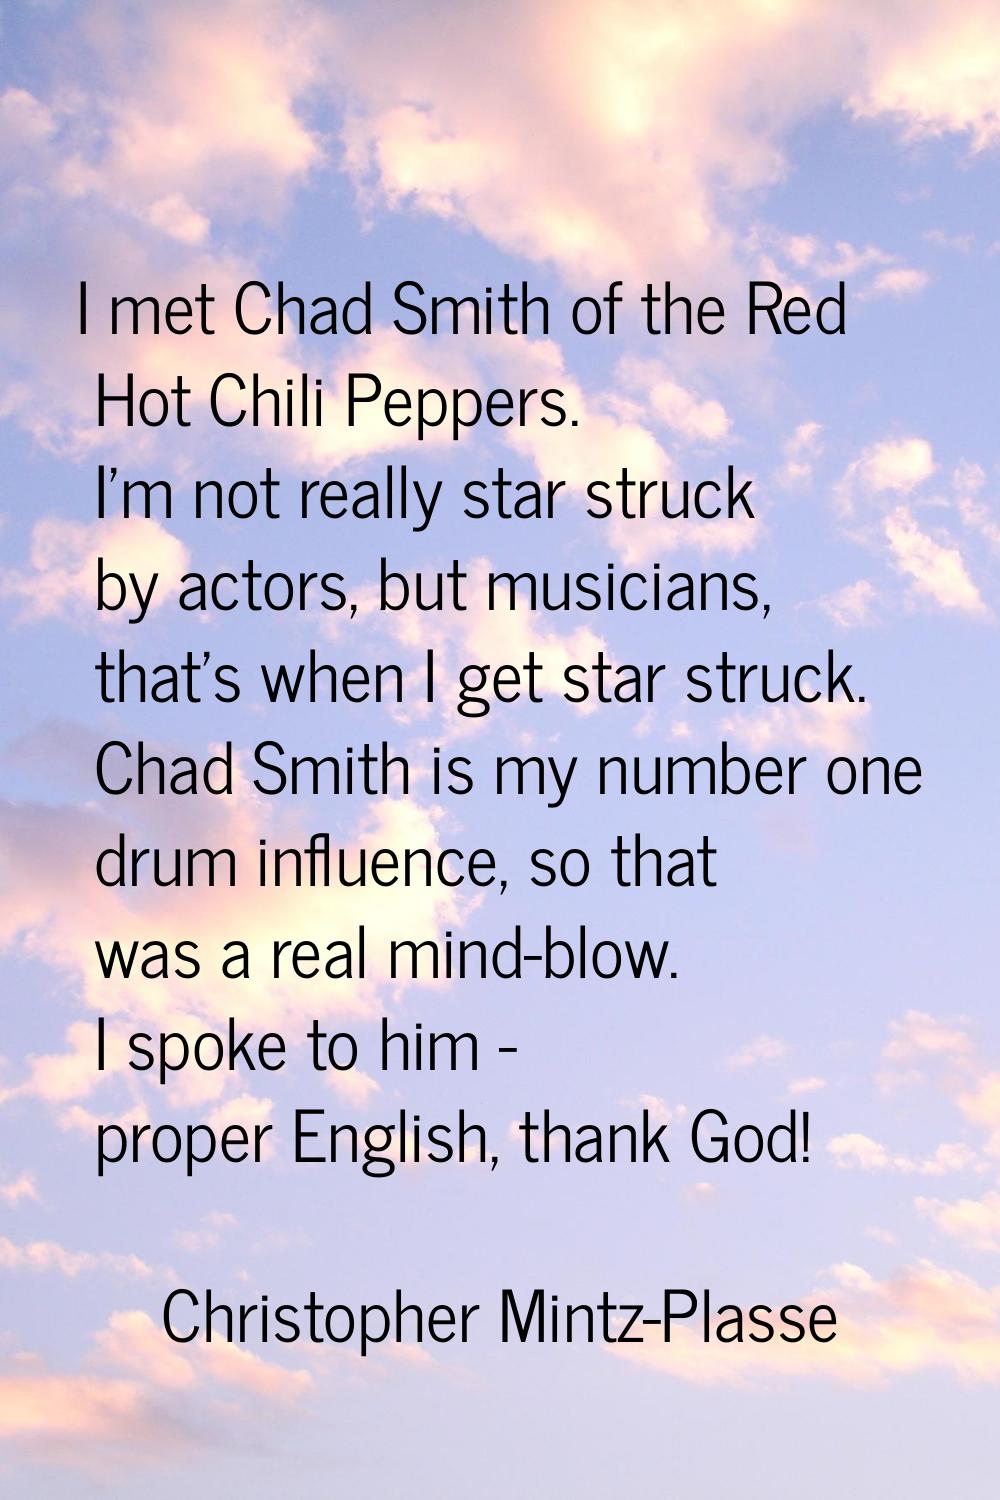 I met Chad Smith of the Red Hot Chili Peppers. I'm not really star struck by actors, but musicians,